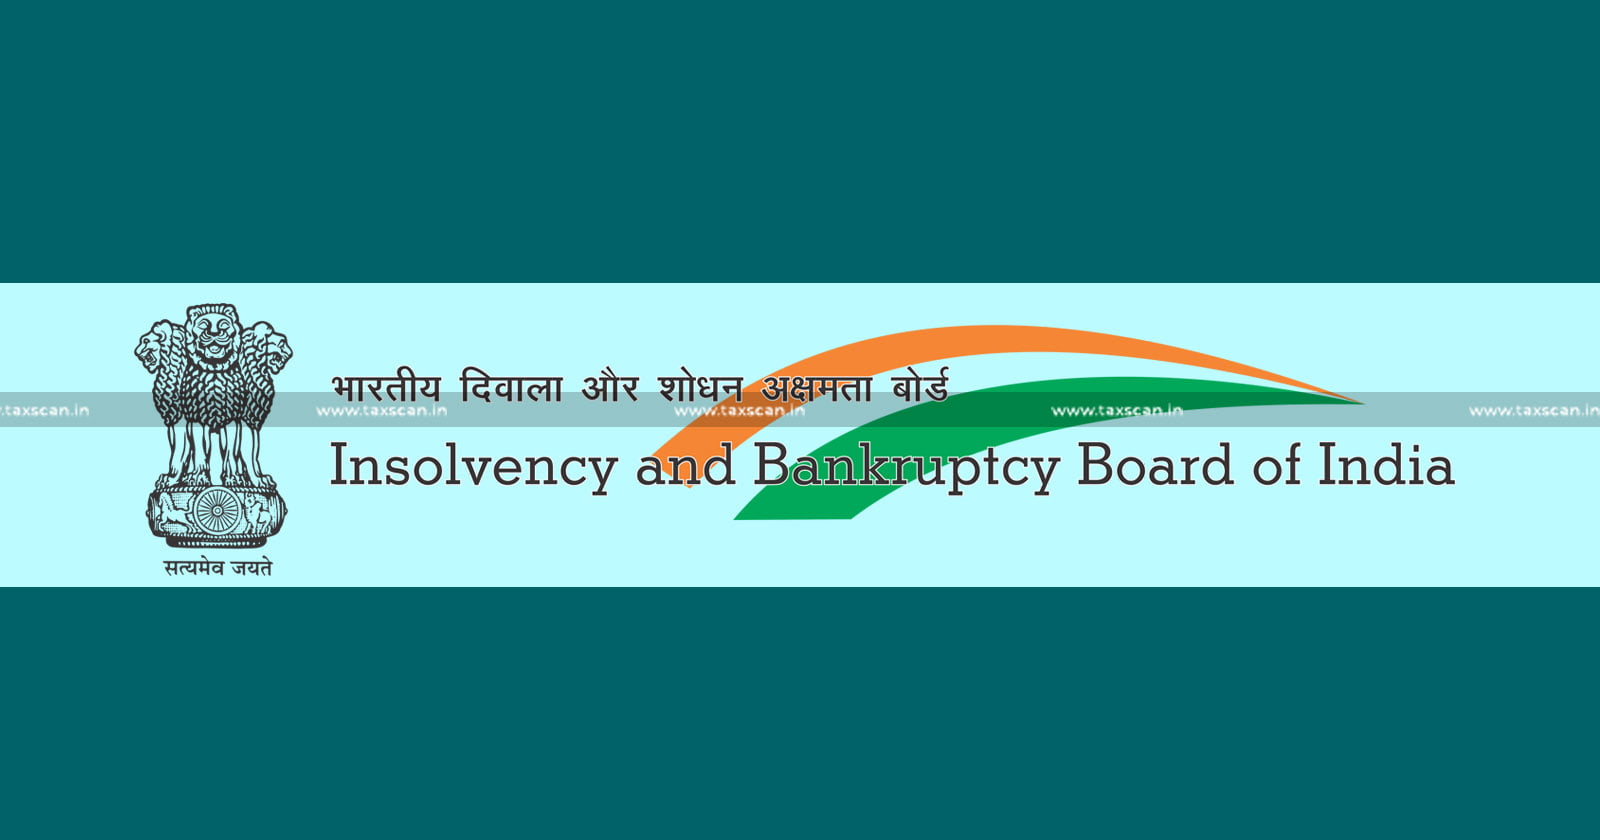 IBBI - IP Conclave - IP Conclave in Chennai - Insolvency and Bankruptcy Board of India - taxscan